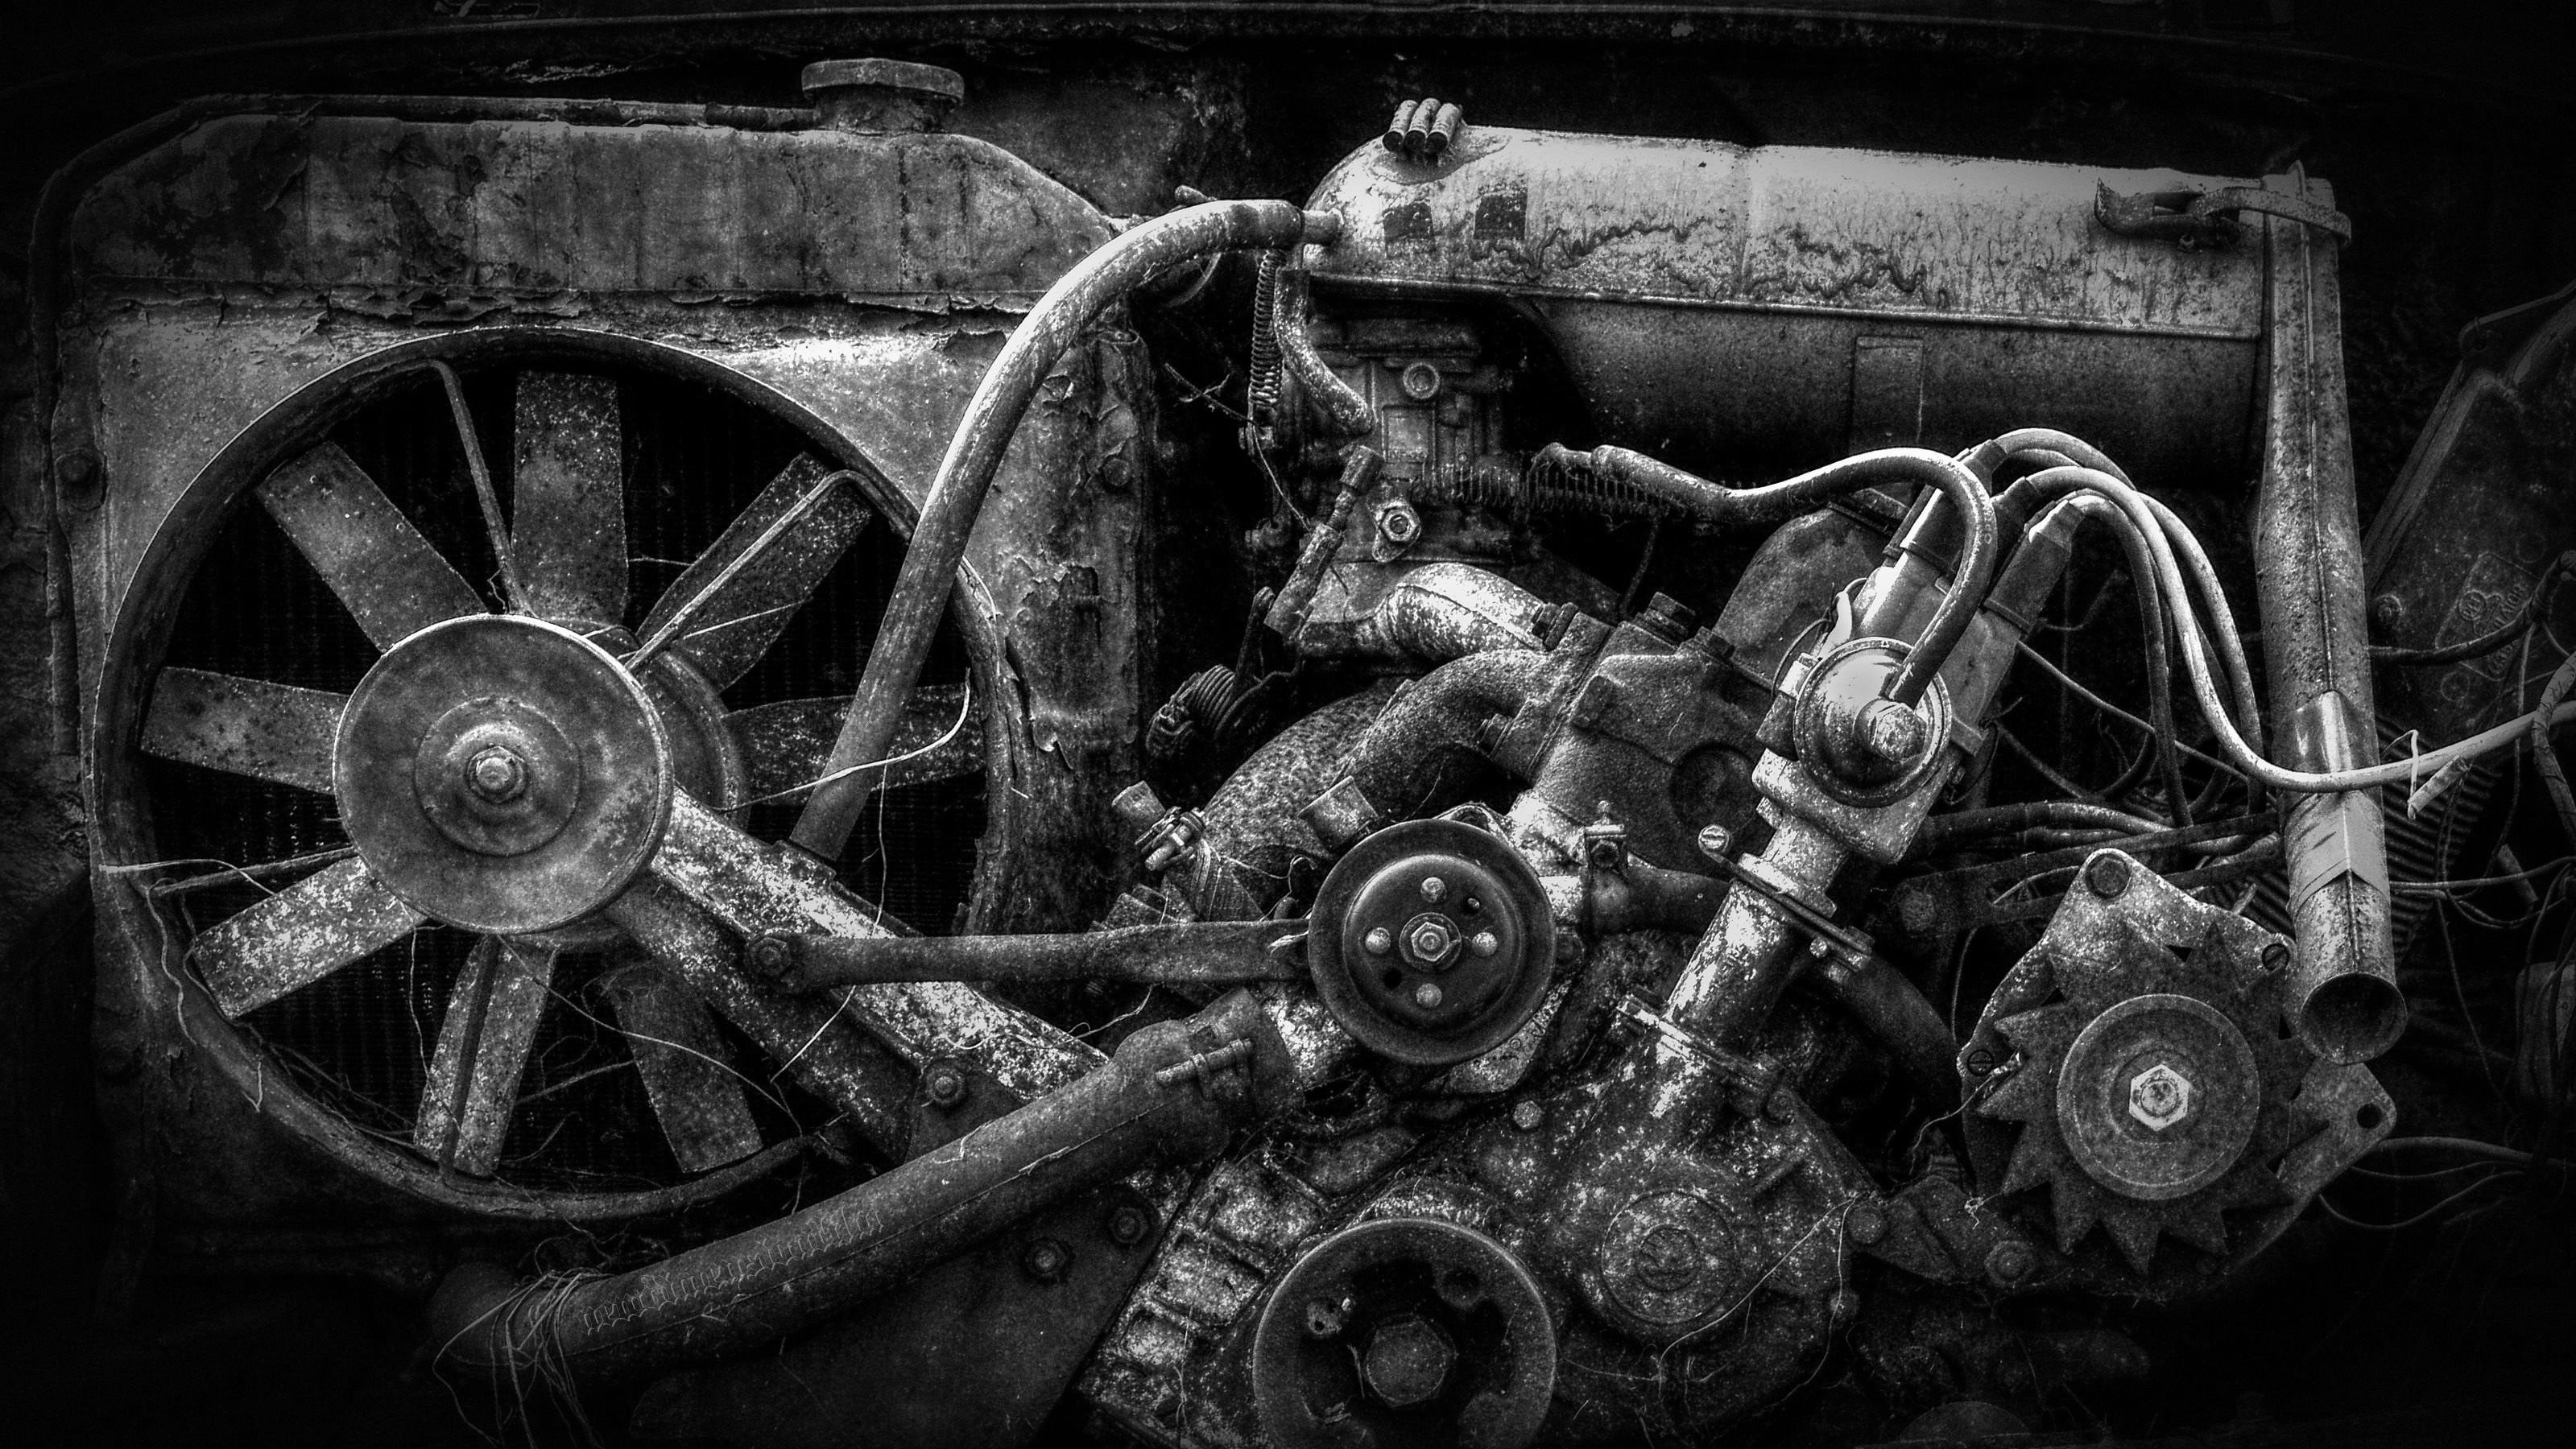 gray and black vehicle engine, black background, engines, gears